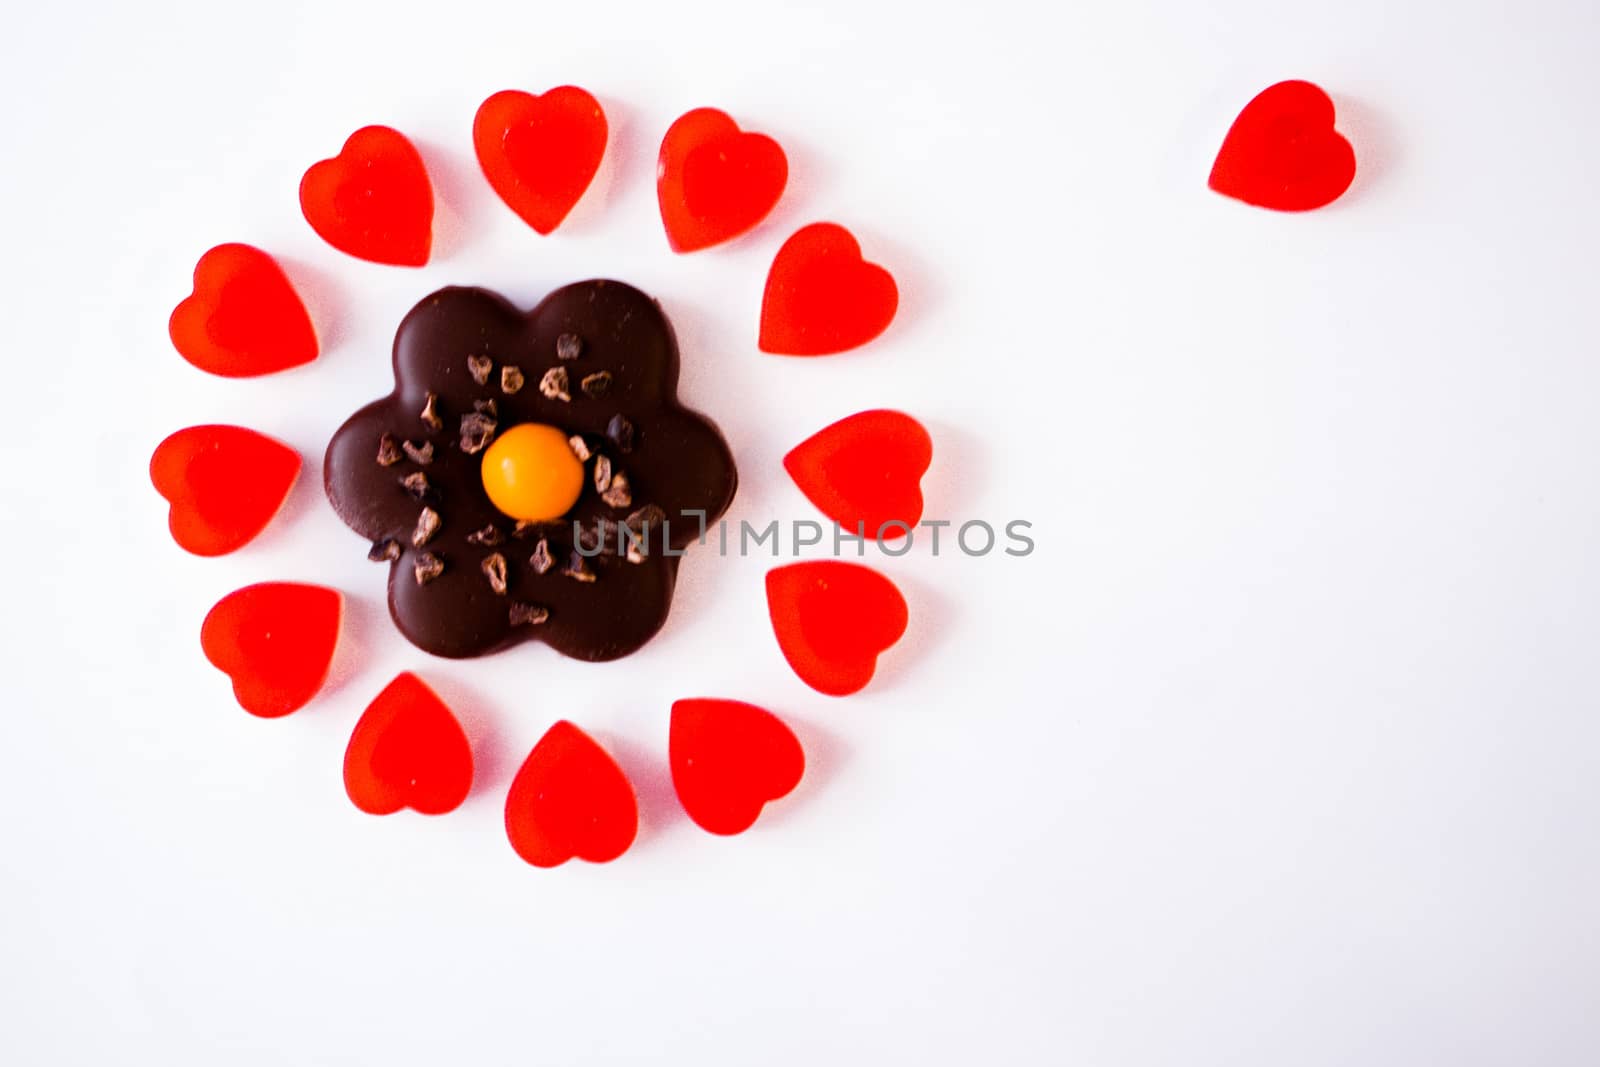 confectionery - marmalade in the form of a heart and cookies in the form of a flower by alexandr_sorokin